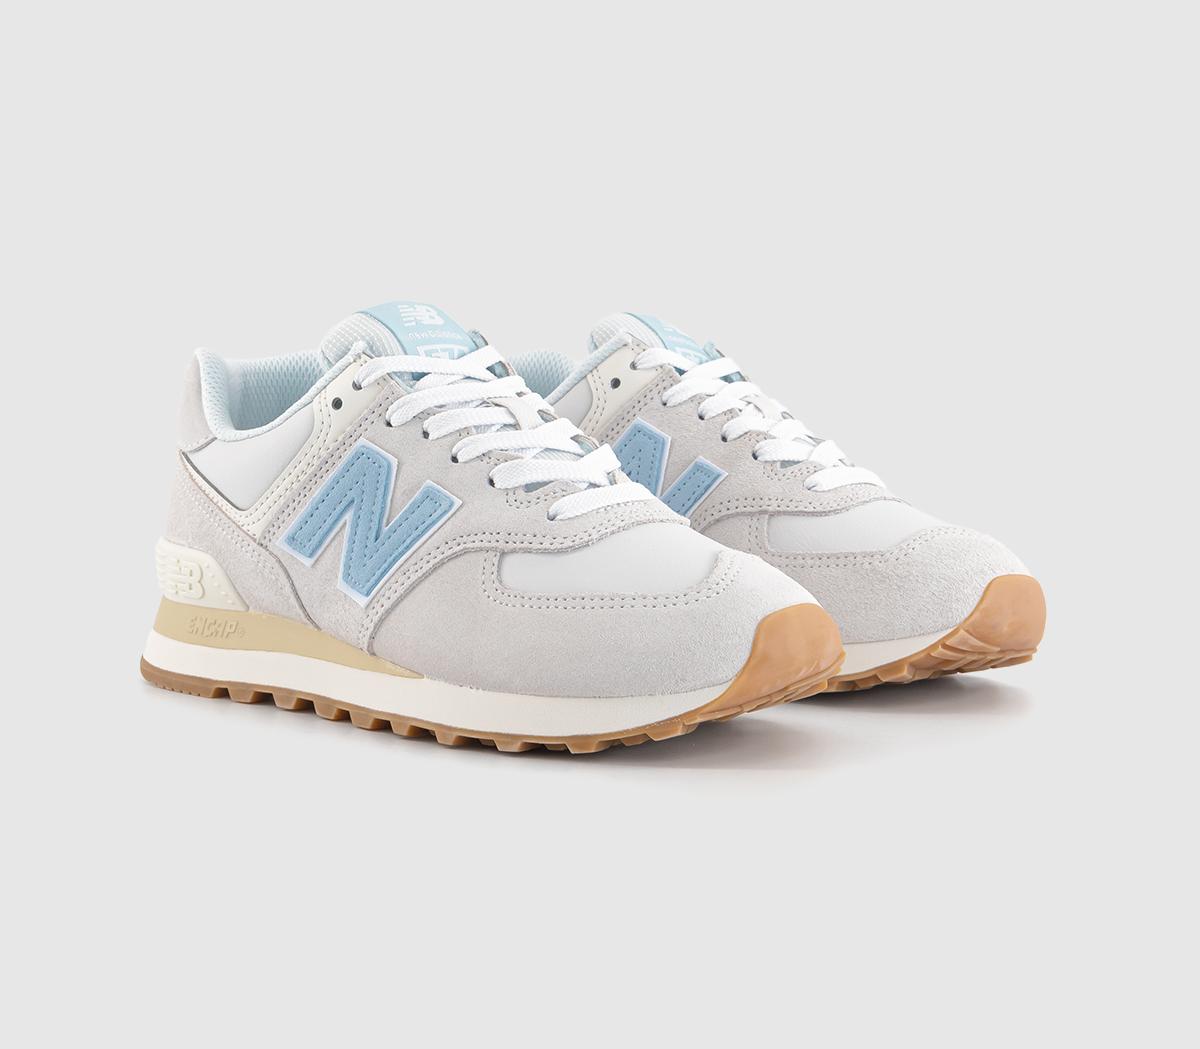 New Balance Womens 574 Trainers Reflection Natural, 5